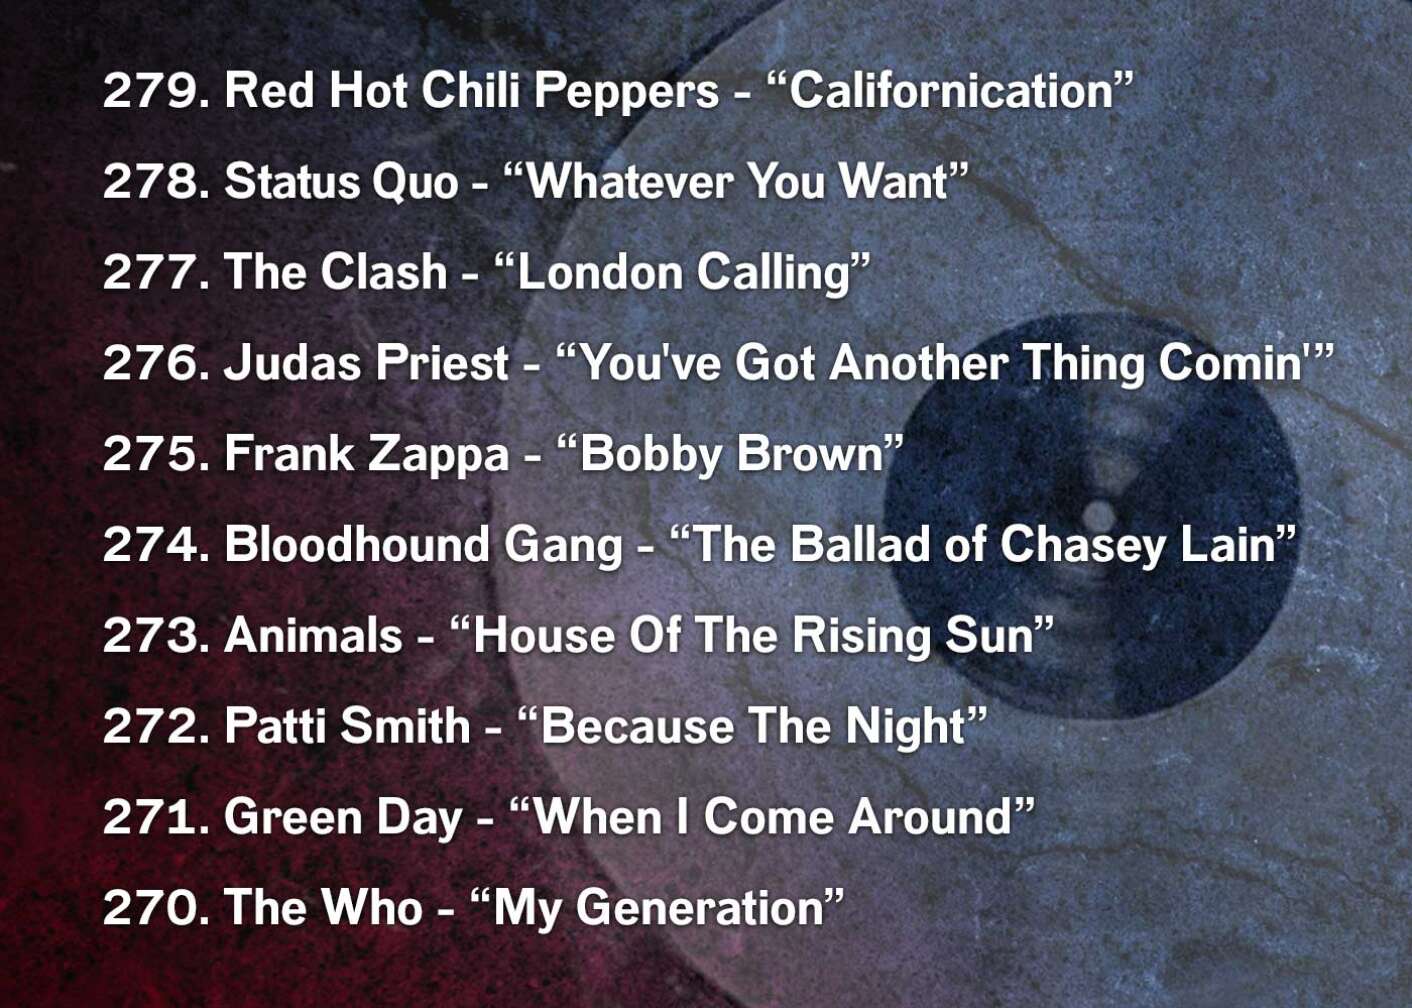 279. Red Hot Chili Peppers - “Californication” 278. Status Quo - “Whatever You Want” 277. The Clash - “London Calling” 276. Judas Priest - “You've Got Another Thing Comin'” 275. Frank Zappa - “Bobby Brown” 274. Bloodhound Gang - “The Ballad of Chasey Lain” 273. Animals - “House Of The Rising Sun” 272. Patti Smith - “Because The Night” 271. Green Day - “When I Come Around” 270. The Who - “My Generation”